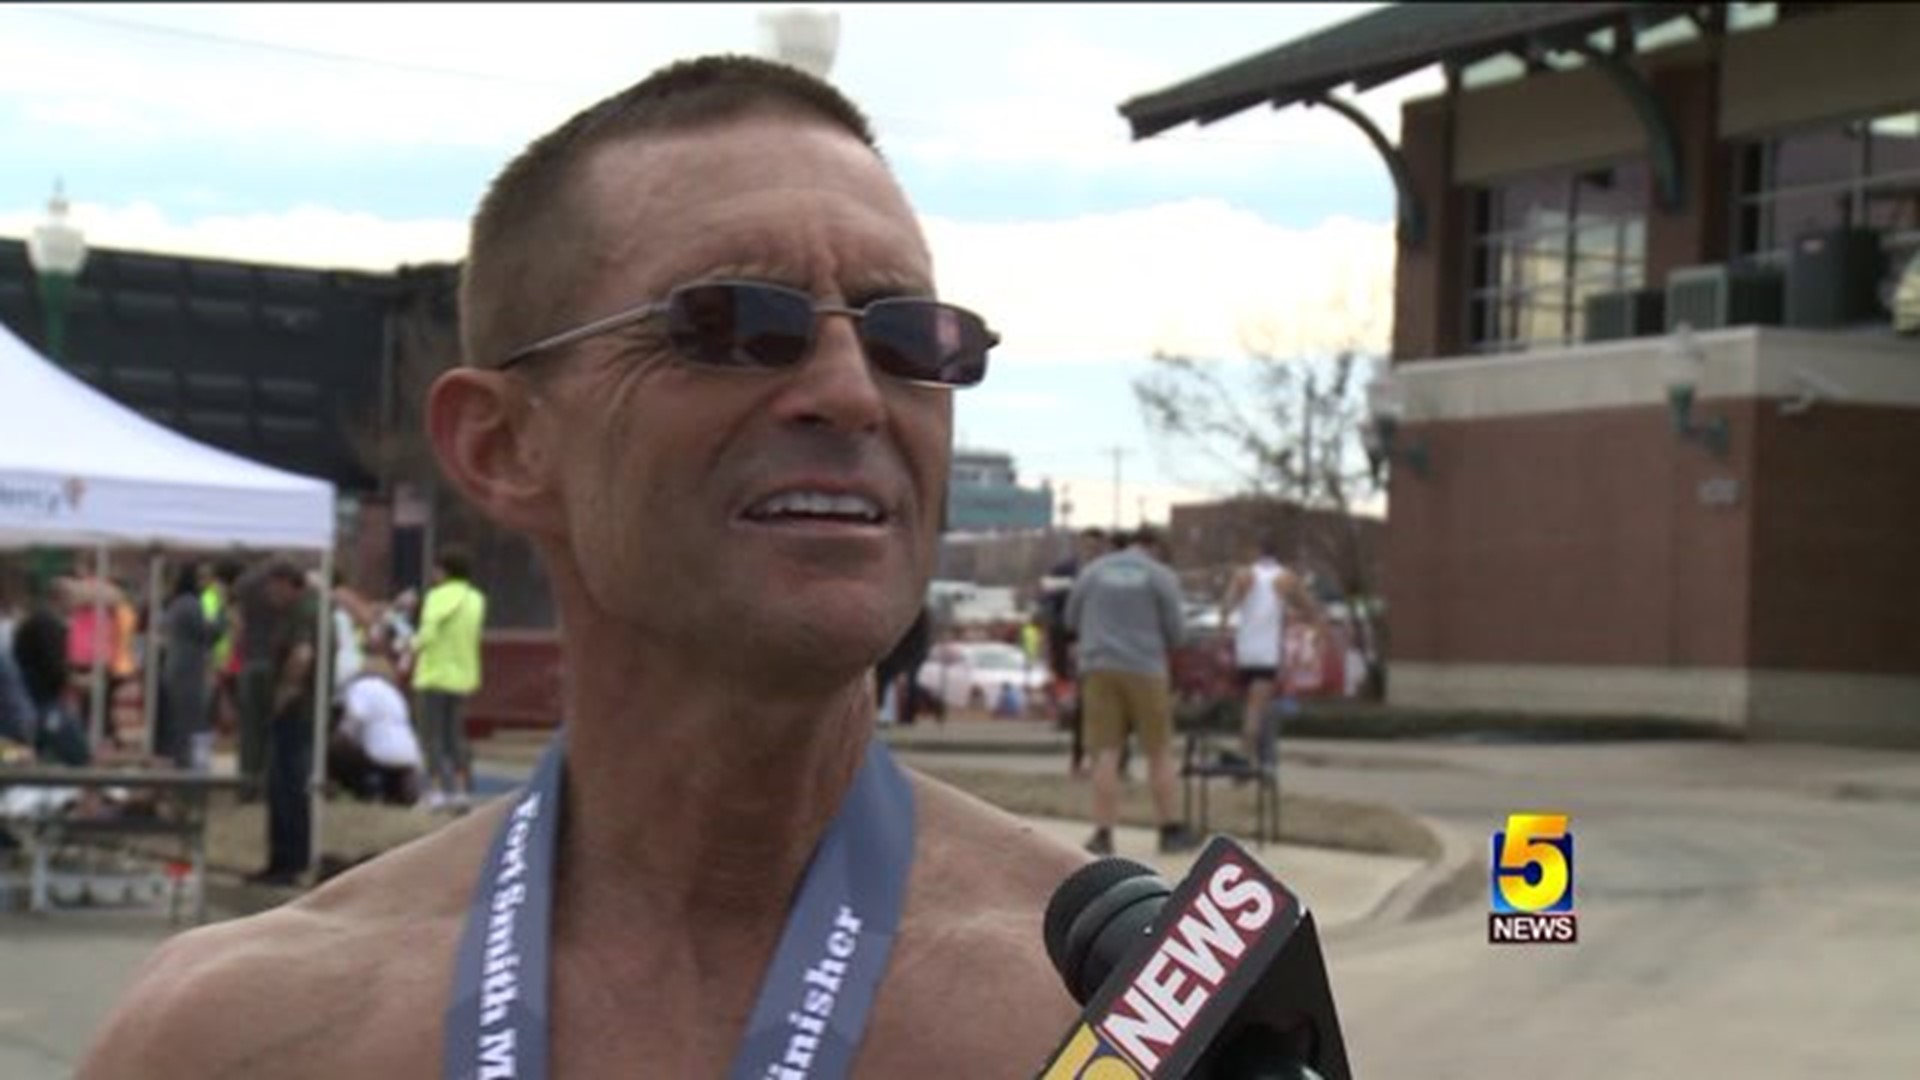 More Than One Thousand Runners at Fort Smith Marathon